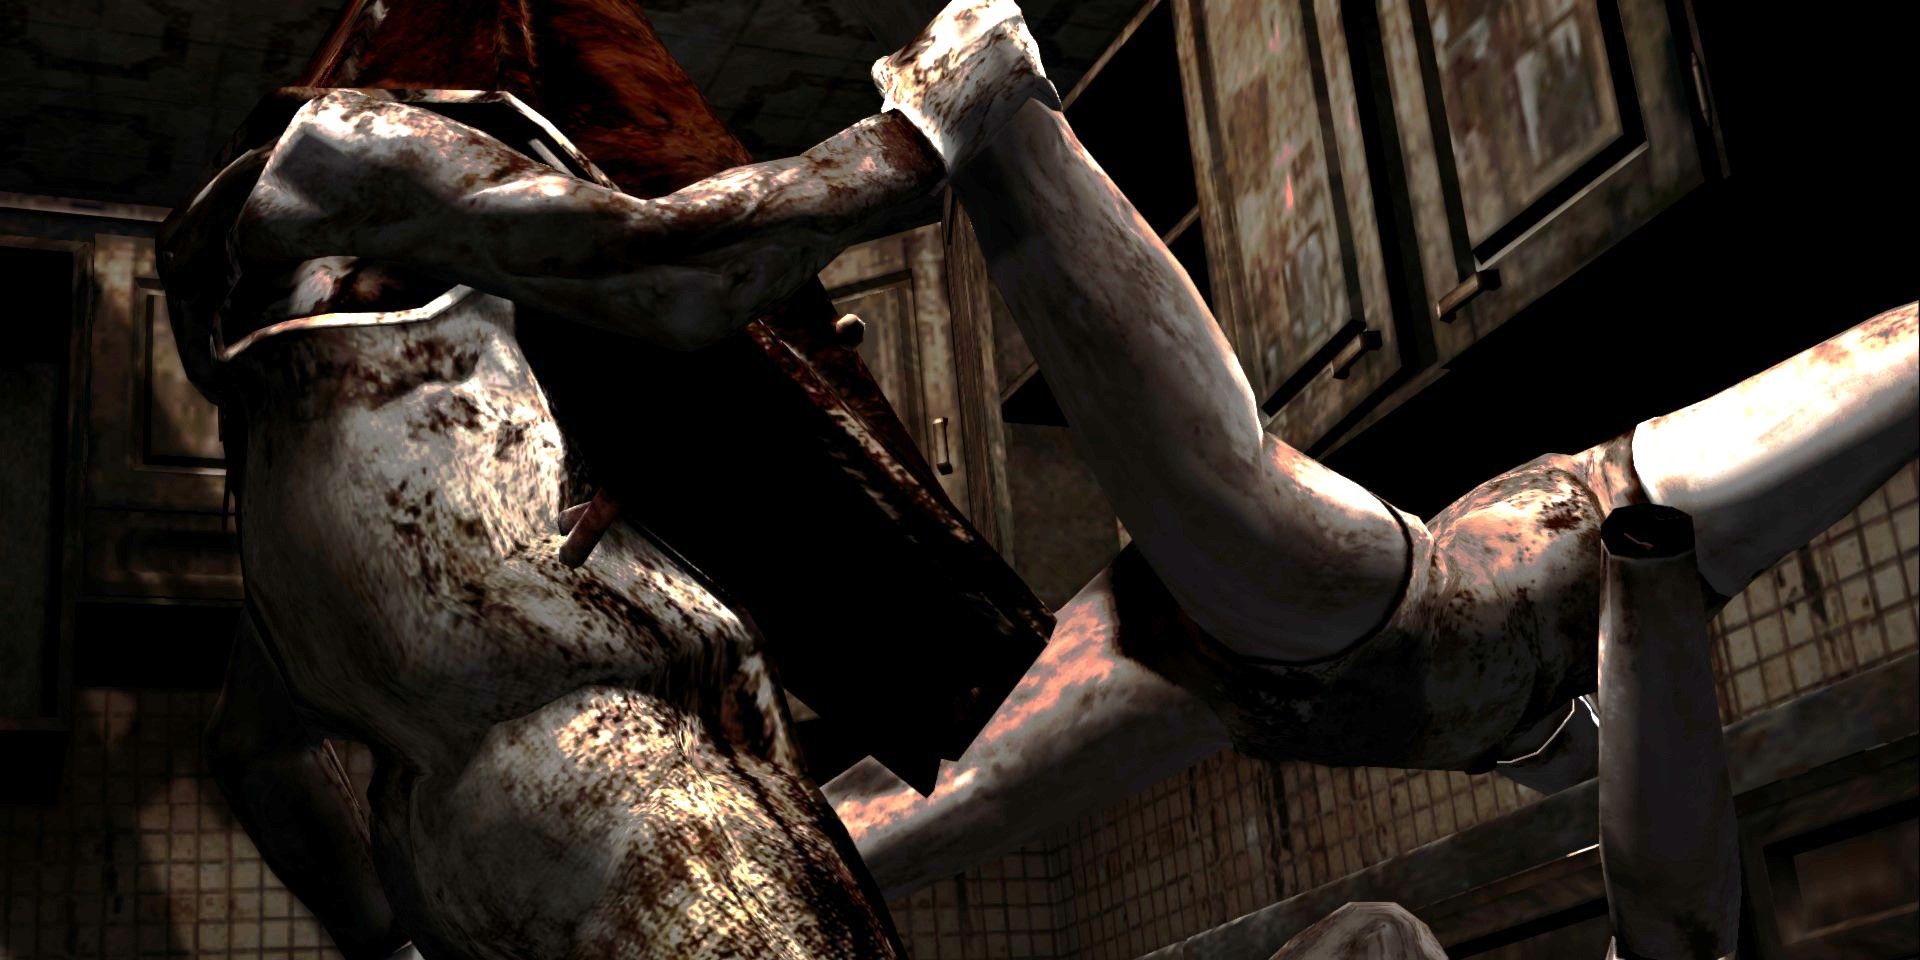 Silent Hill 2 - Pyramid Head assaults two Mannequins